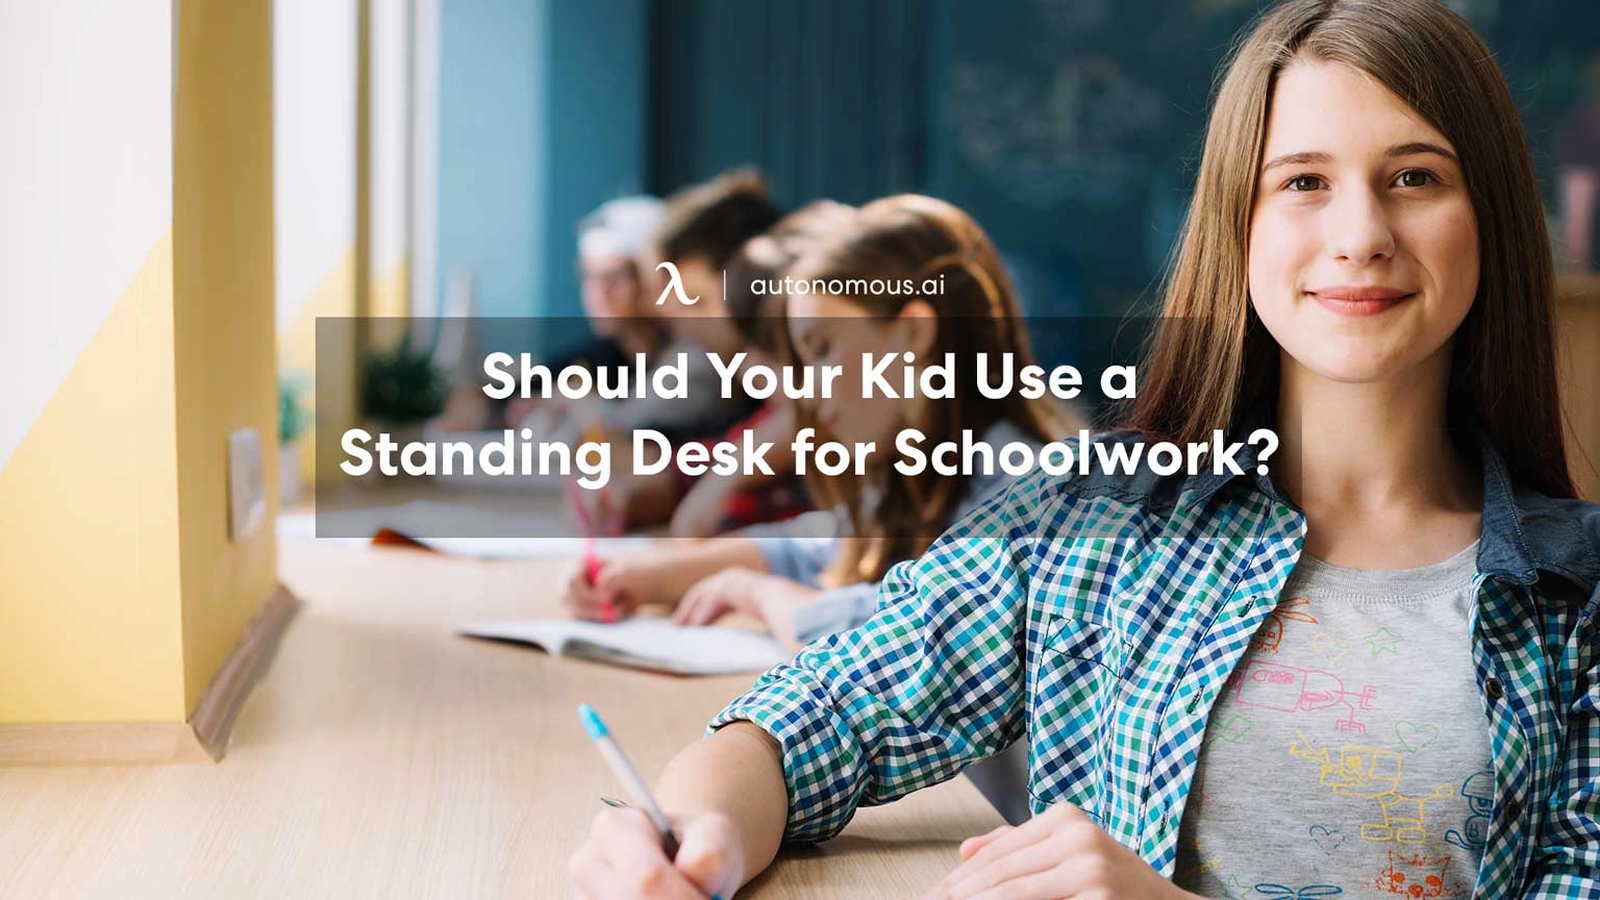 Should Your Kid Use a Standing Desk for Schoolwork?